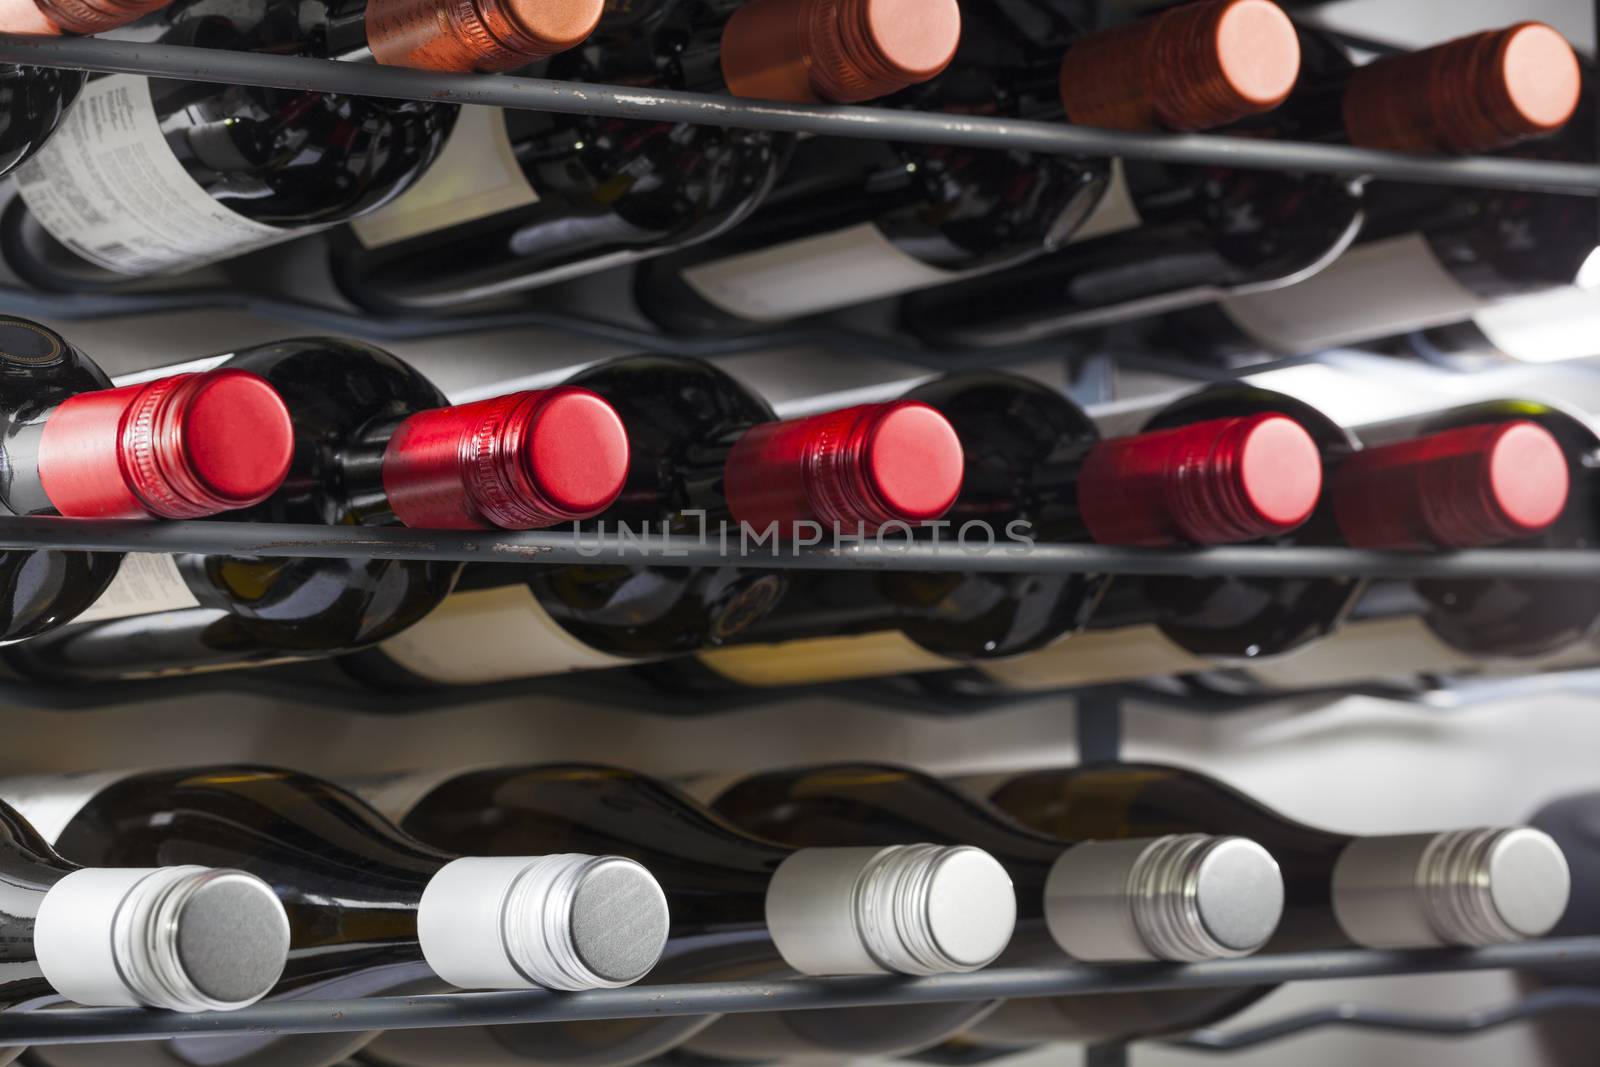 Quality wine bottles with screw caps in a wine rack by kievith